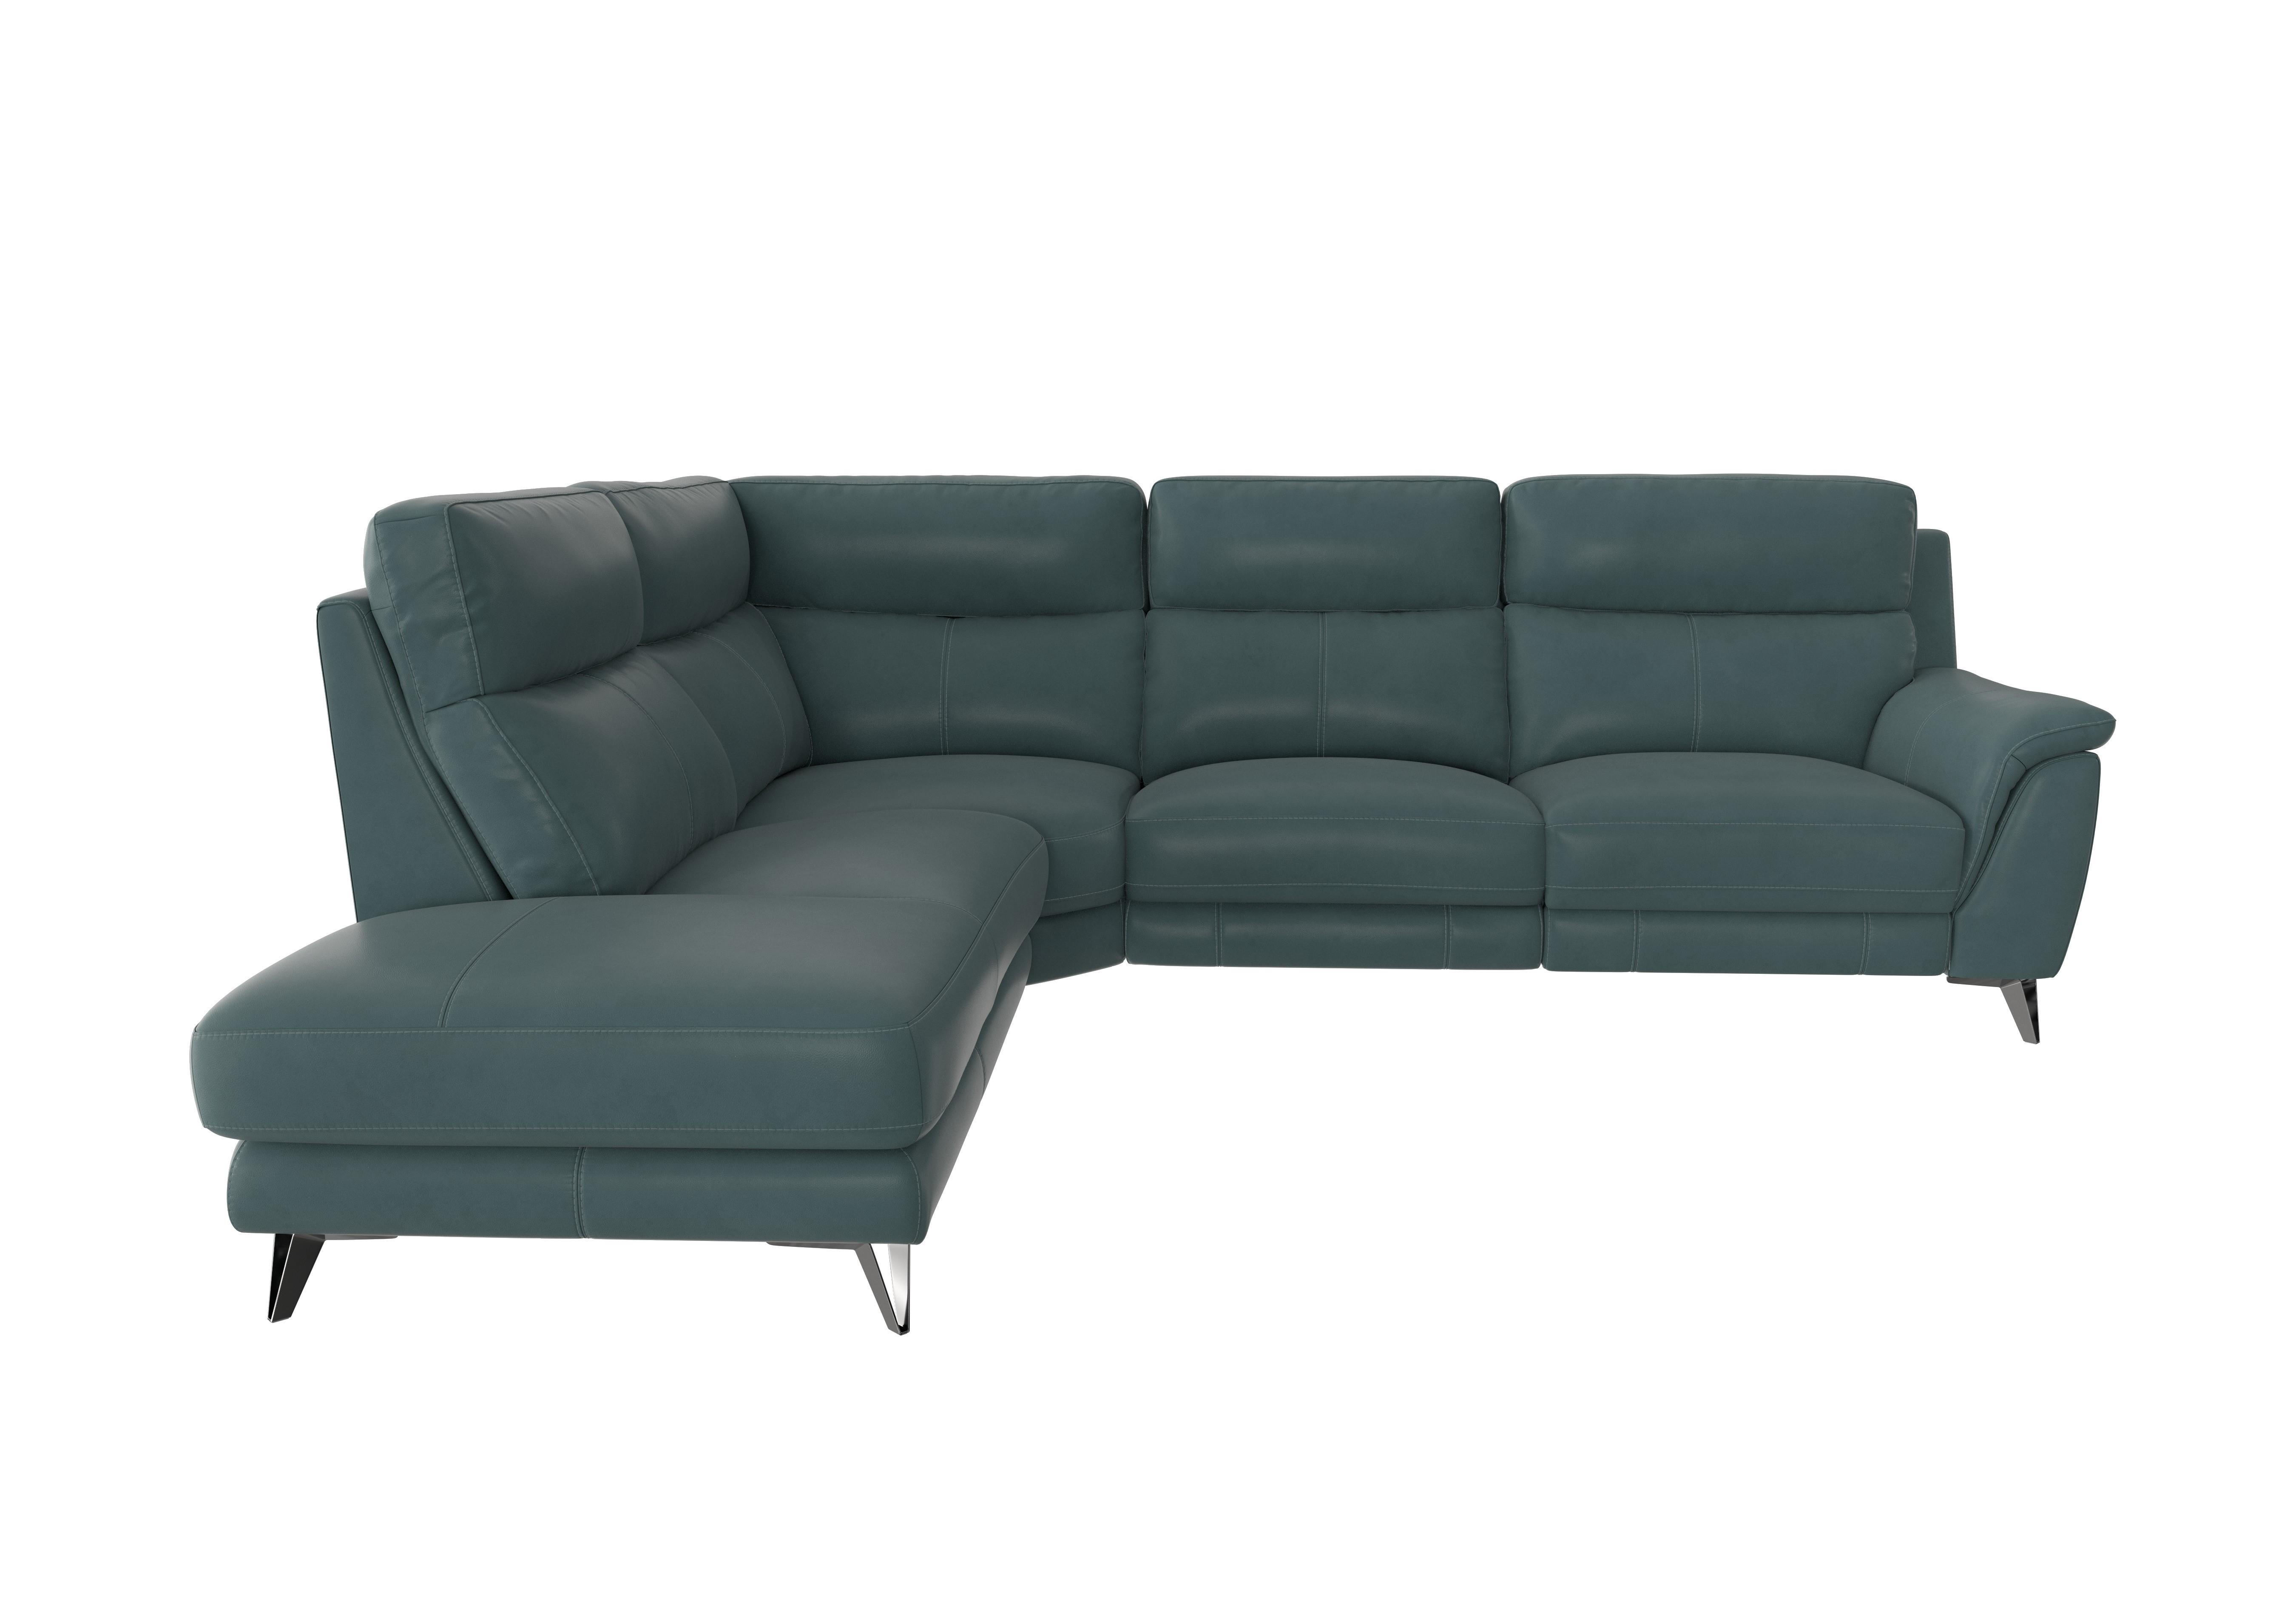 Contempo Chaise End Leather Sofa in Bv-301e Lake Green on Furniture Village